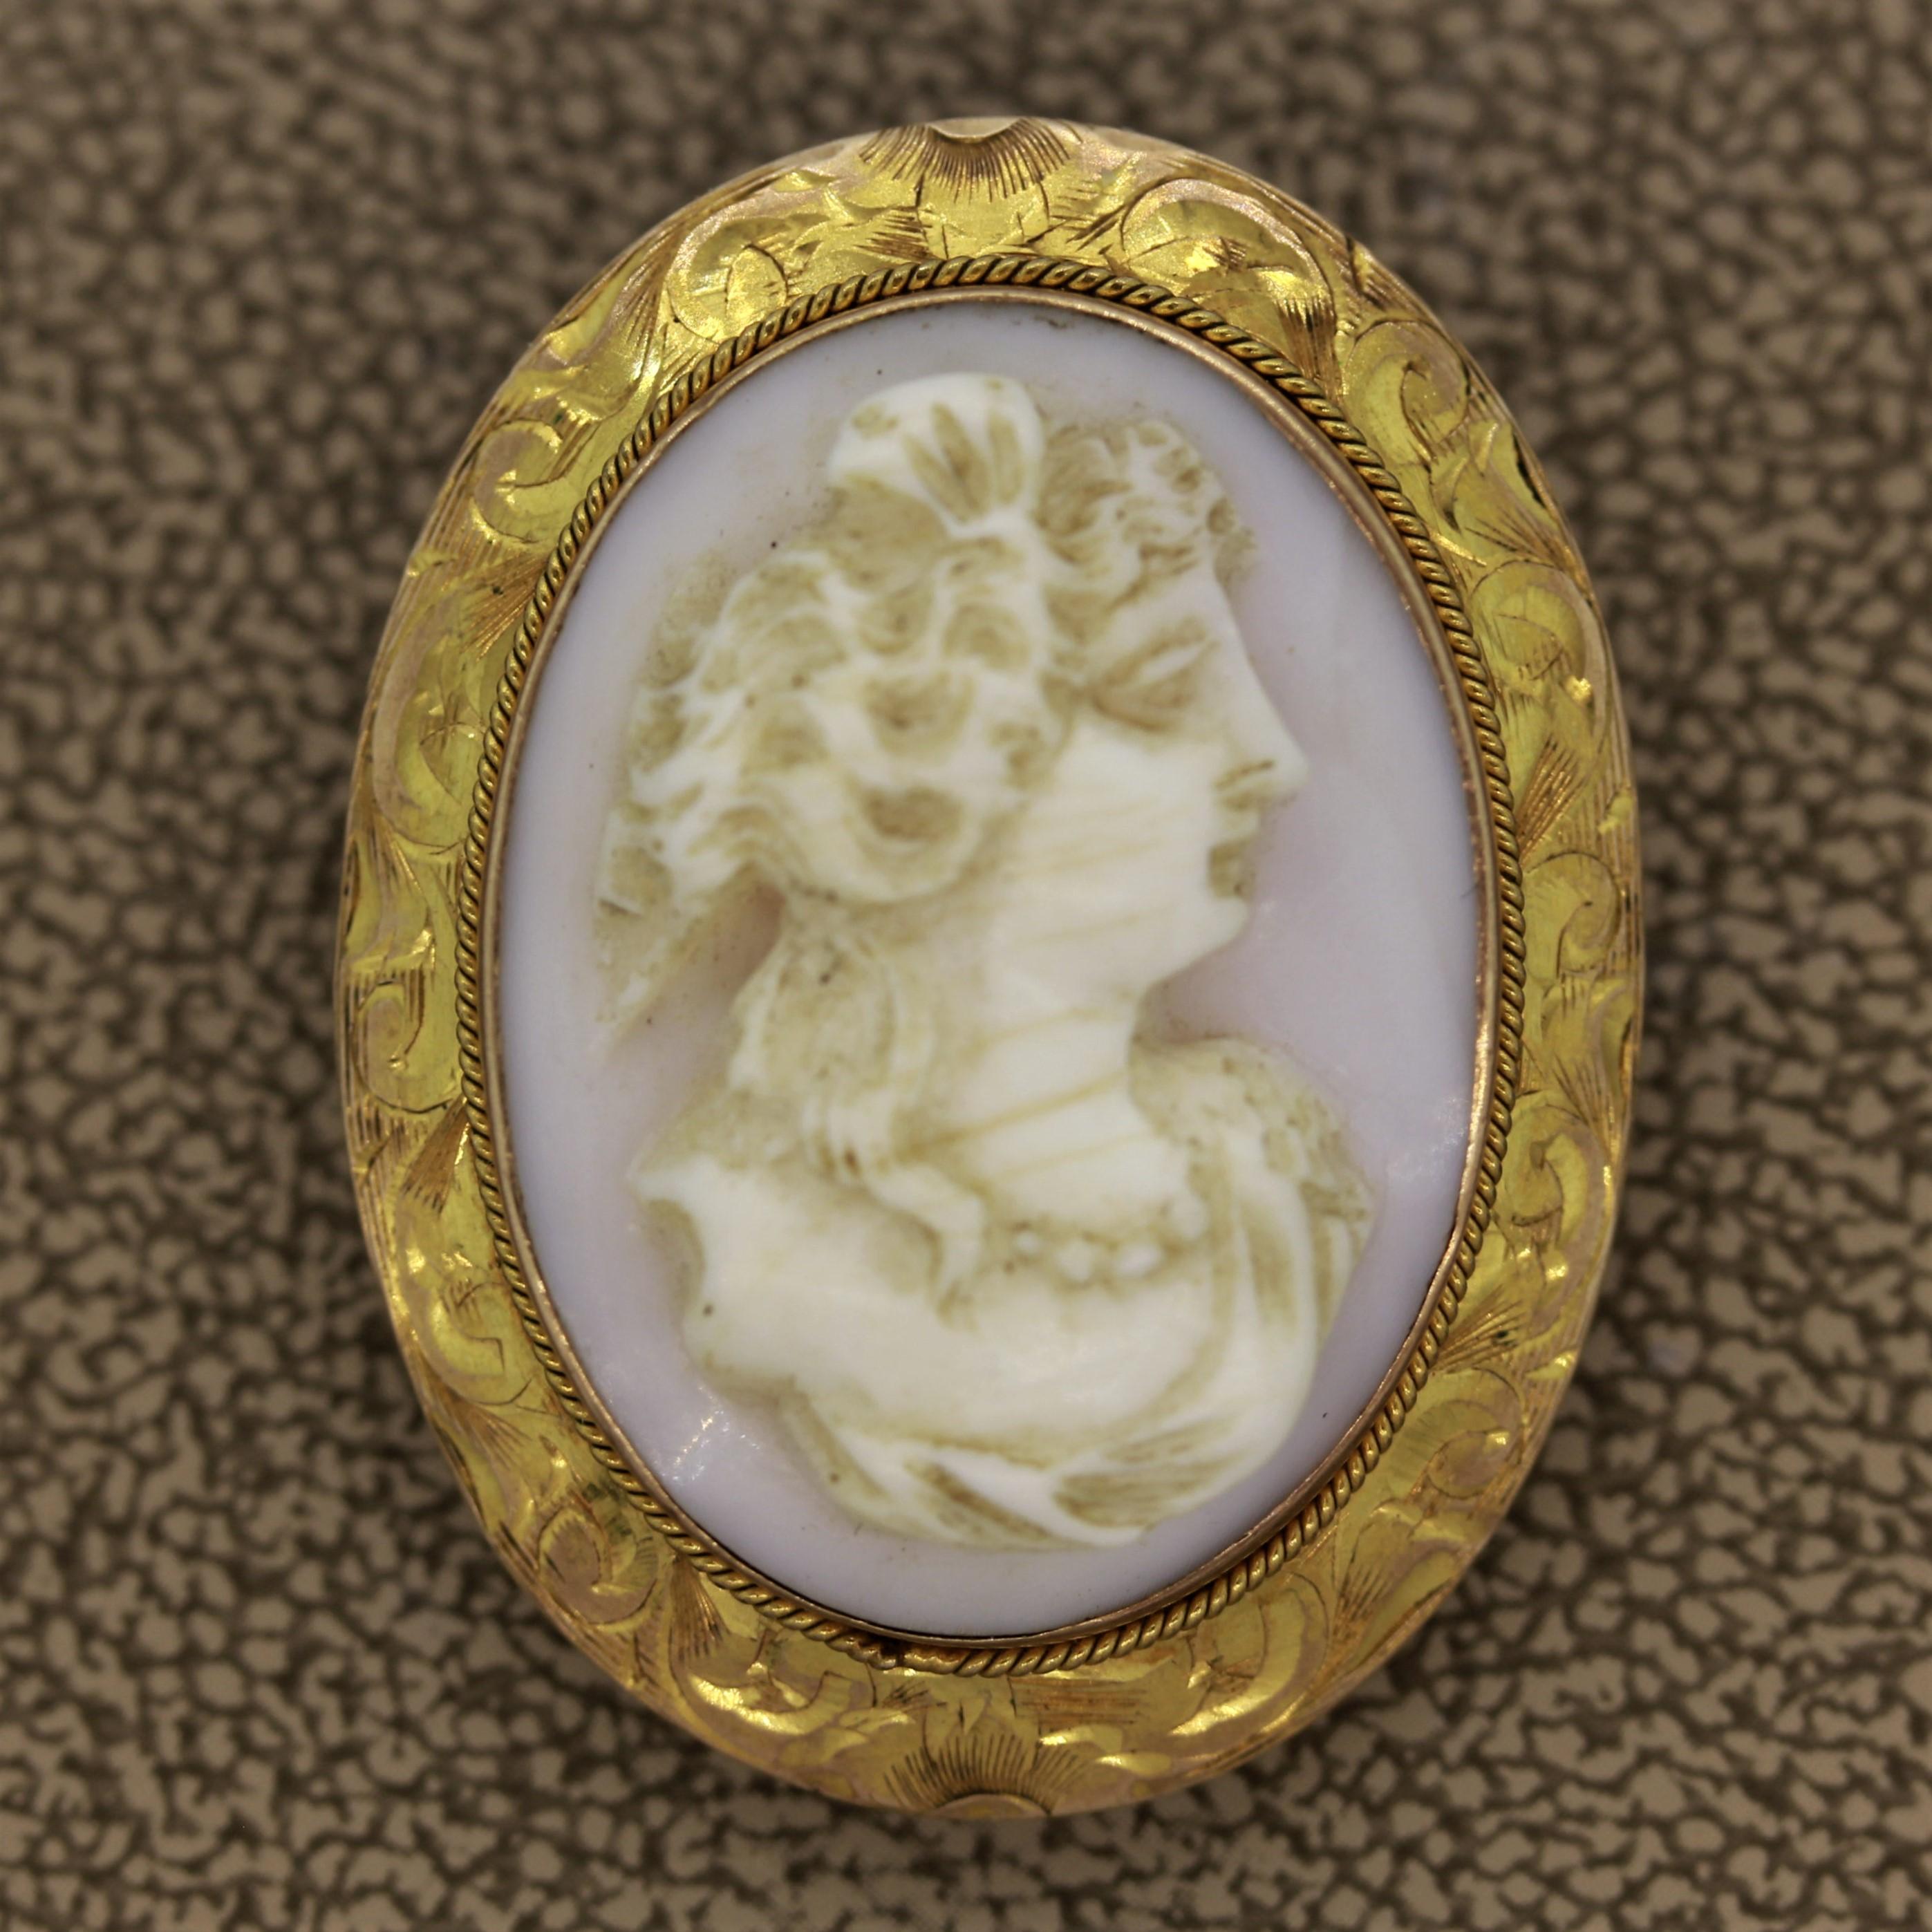 A more refined and rarer cameo made of natural “angel skin” coral. The 10k yellow gold frame was hand-made in the 19th century and the fine workmanship can be seen in the details. A braided gold boarder and filigree on the frame show its quality.

